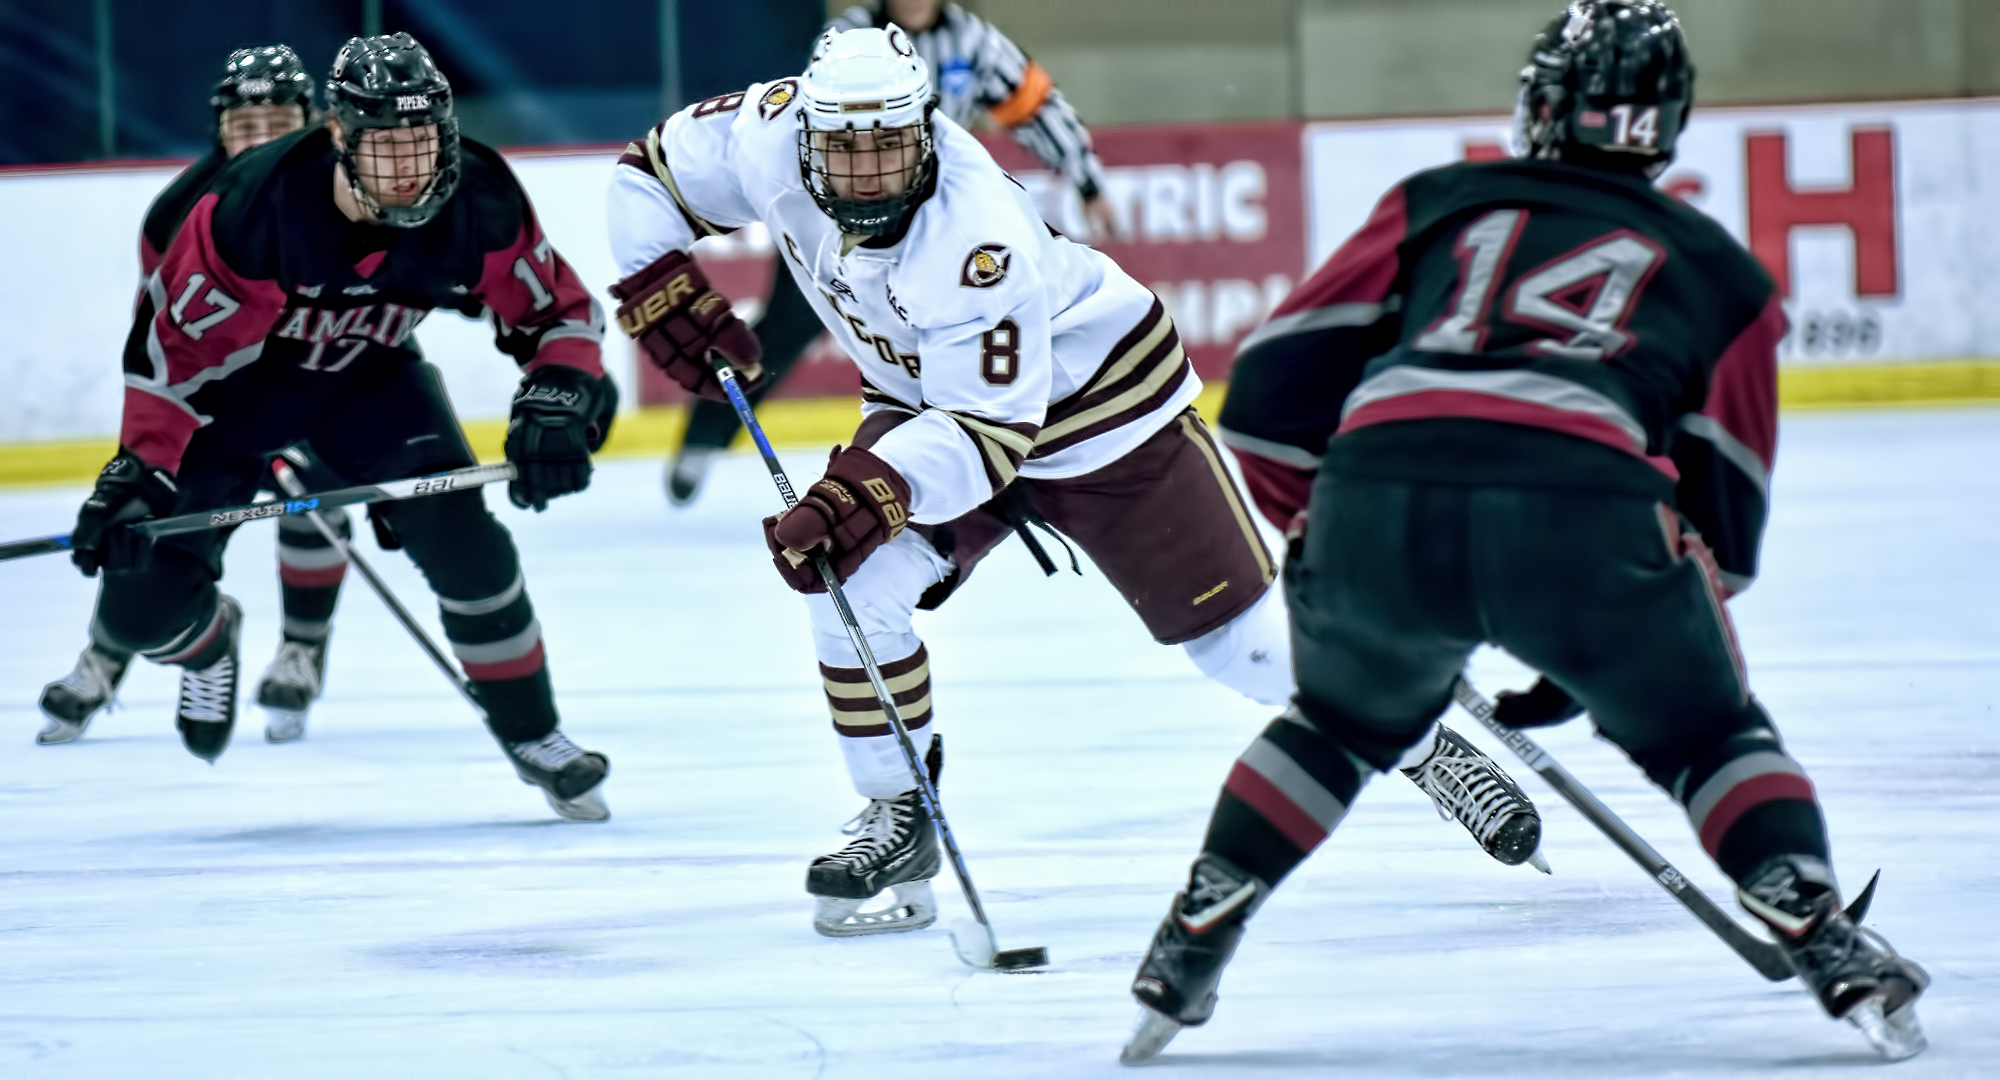 Junior Aaron Herdt brings the puck up the ice against Hamline in the Cobbers' 7-0 win. Herdt had a pair of goals and an assist to push his season total to 19 points.